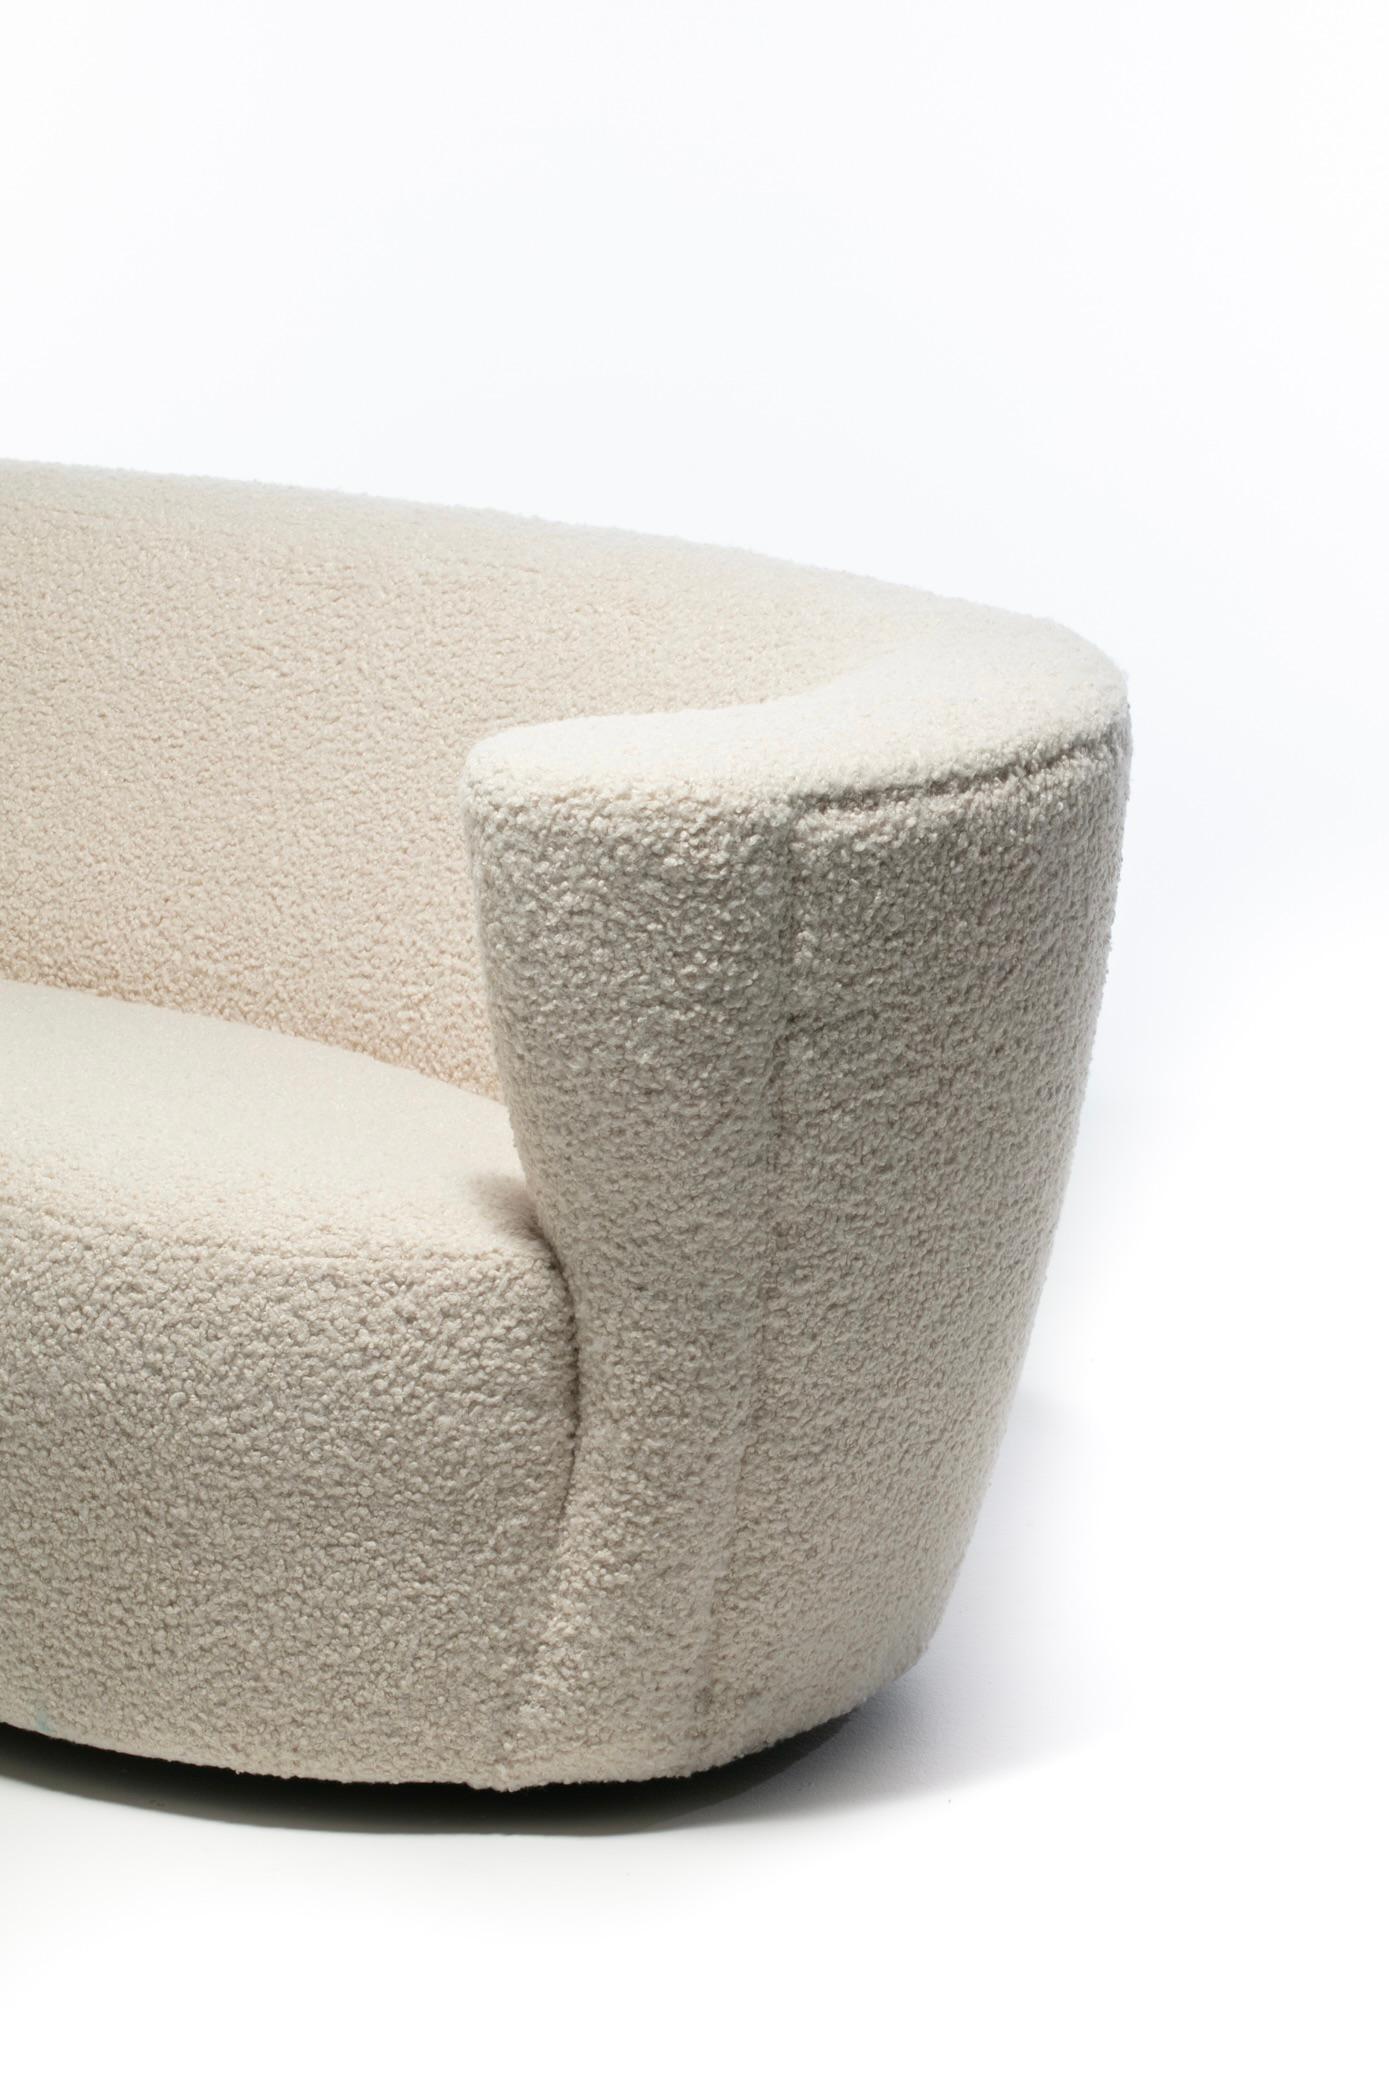 Vladimir Kagan Nautilus Sofa in Ivory White Bouclé by Directional, c. 1990 For Sale 9